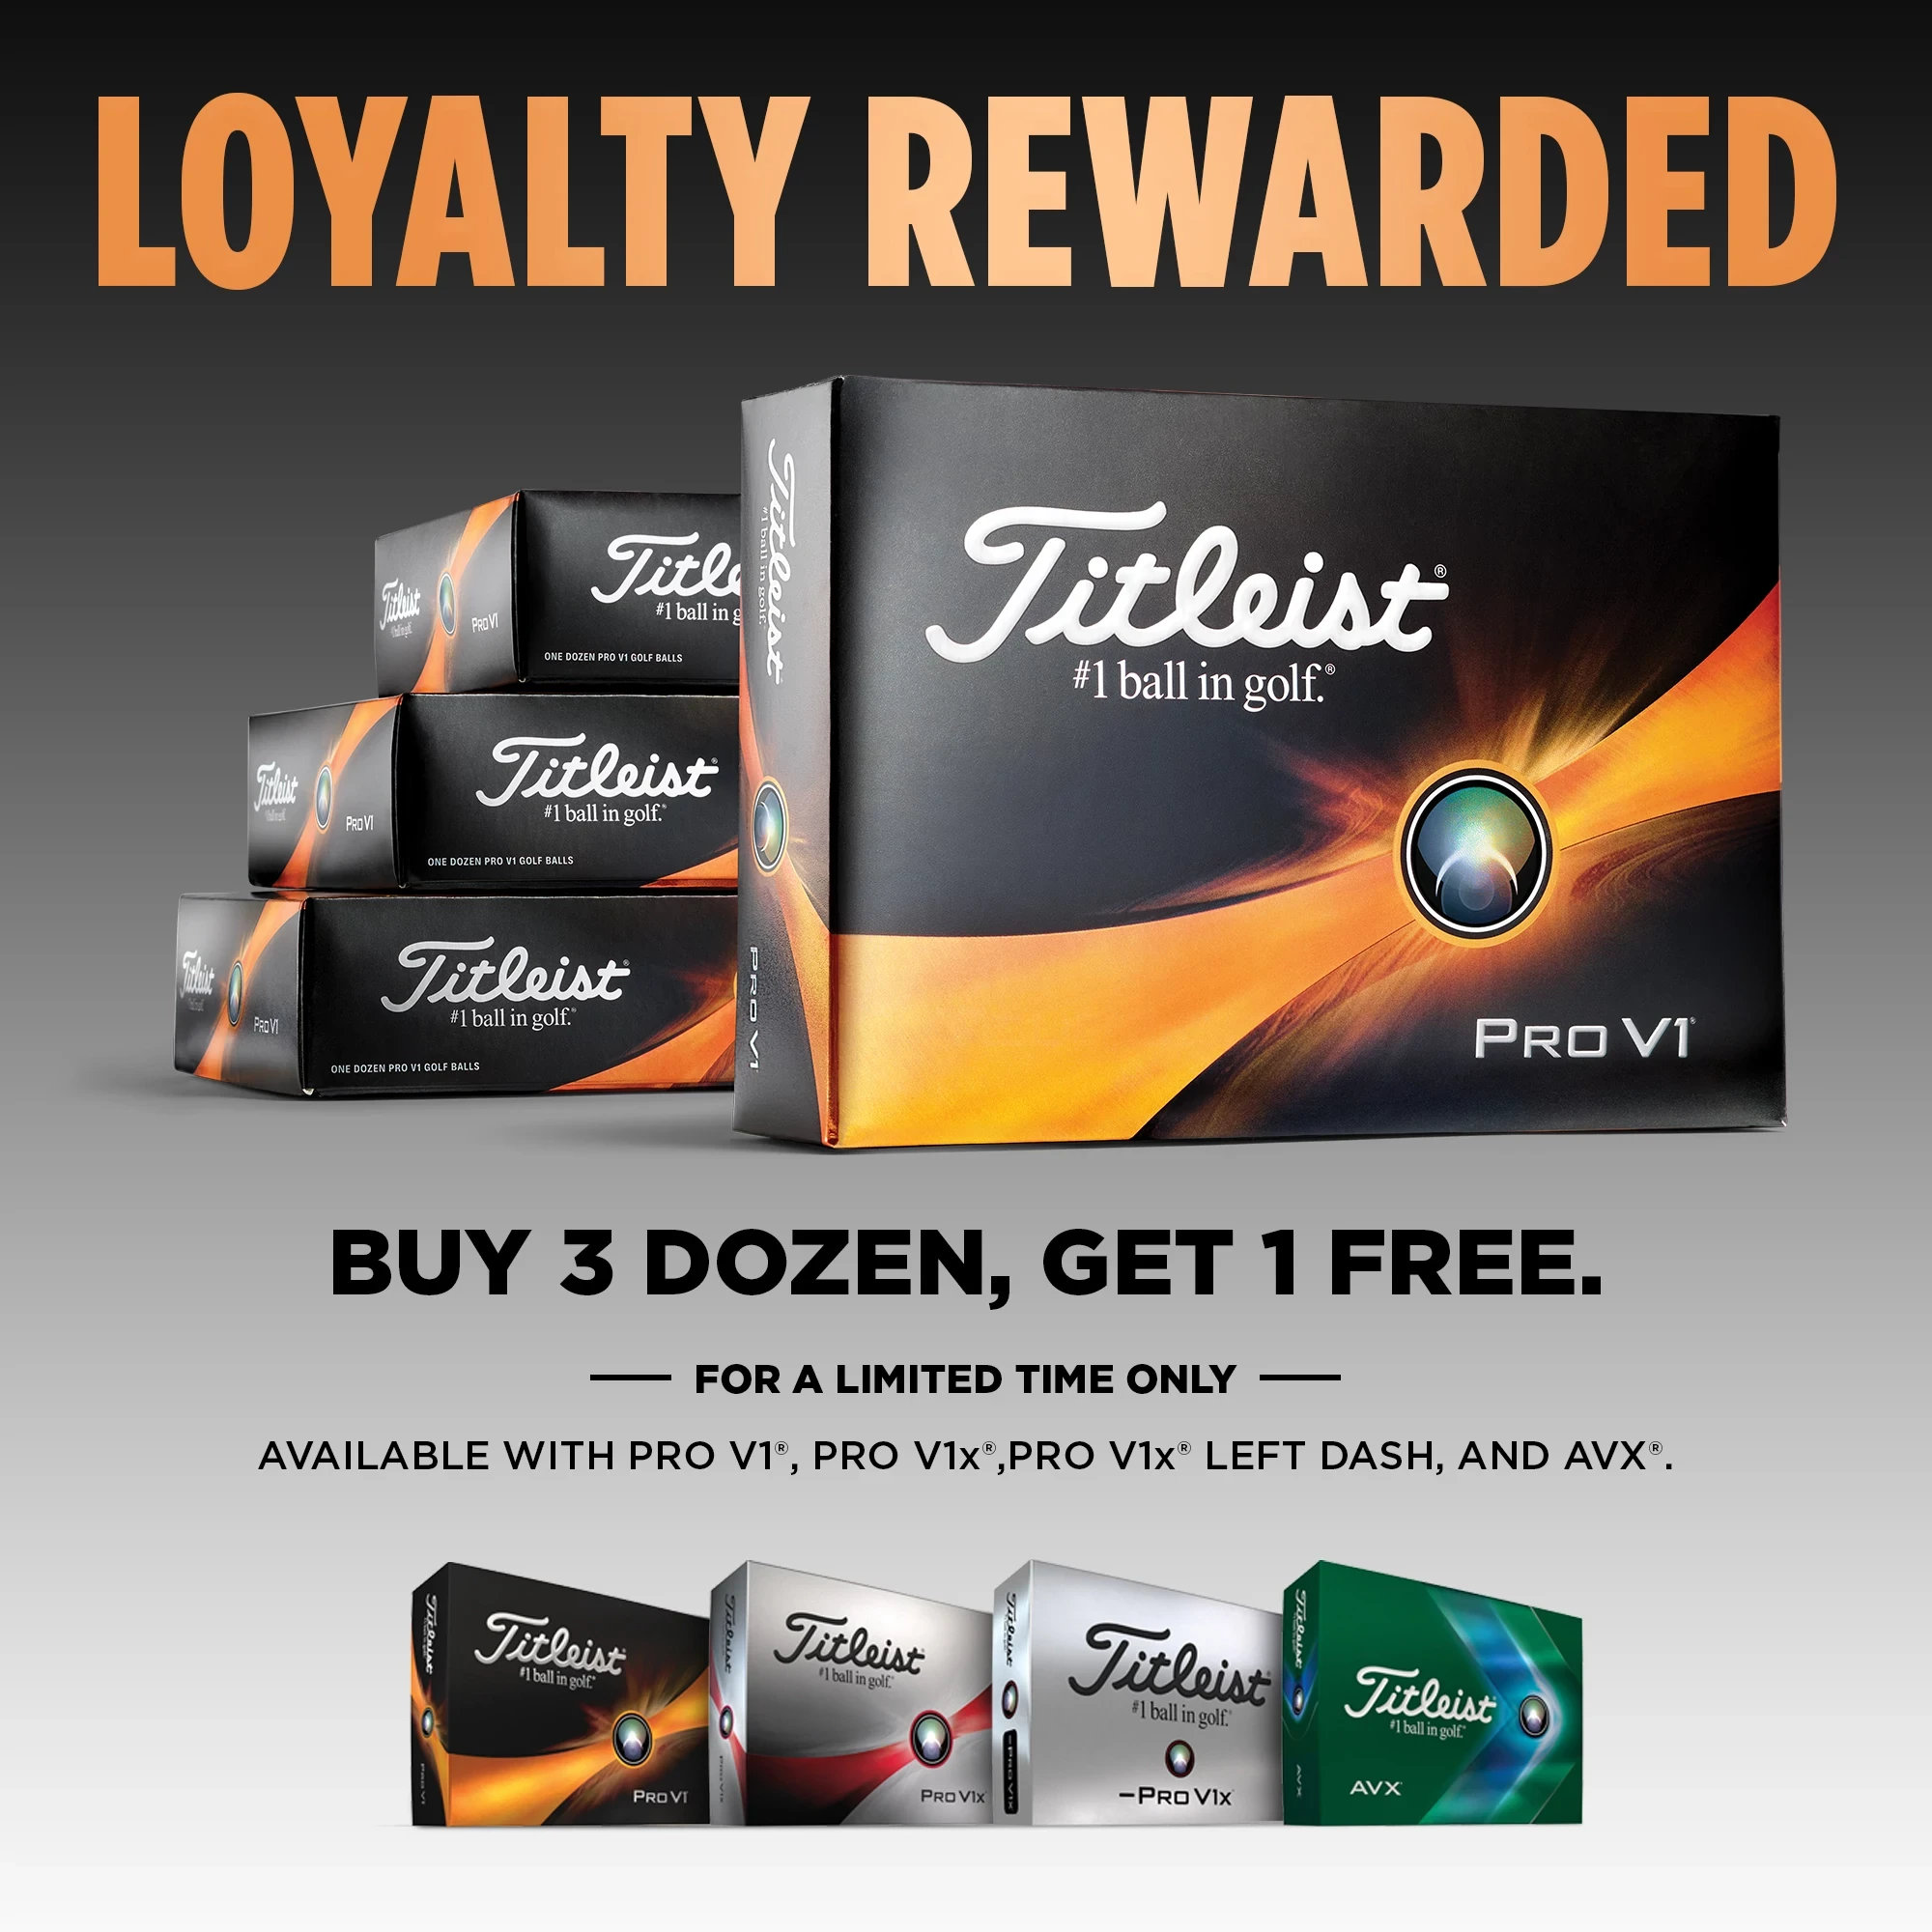 Loyalty Rewarded - Special Limited Time Golf Ball Offer from Titleist